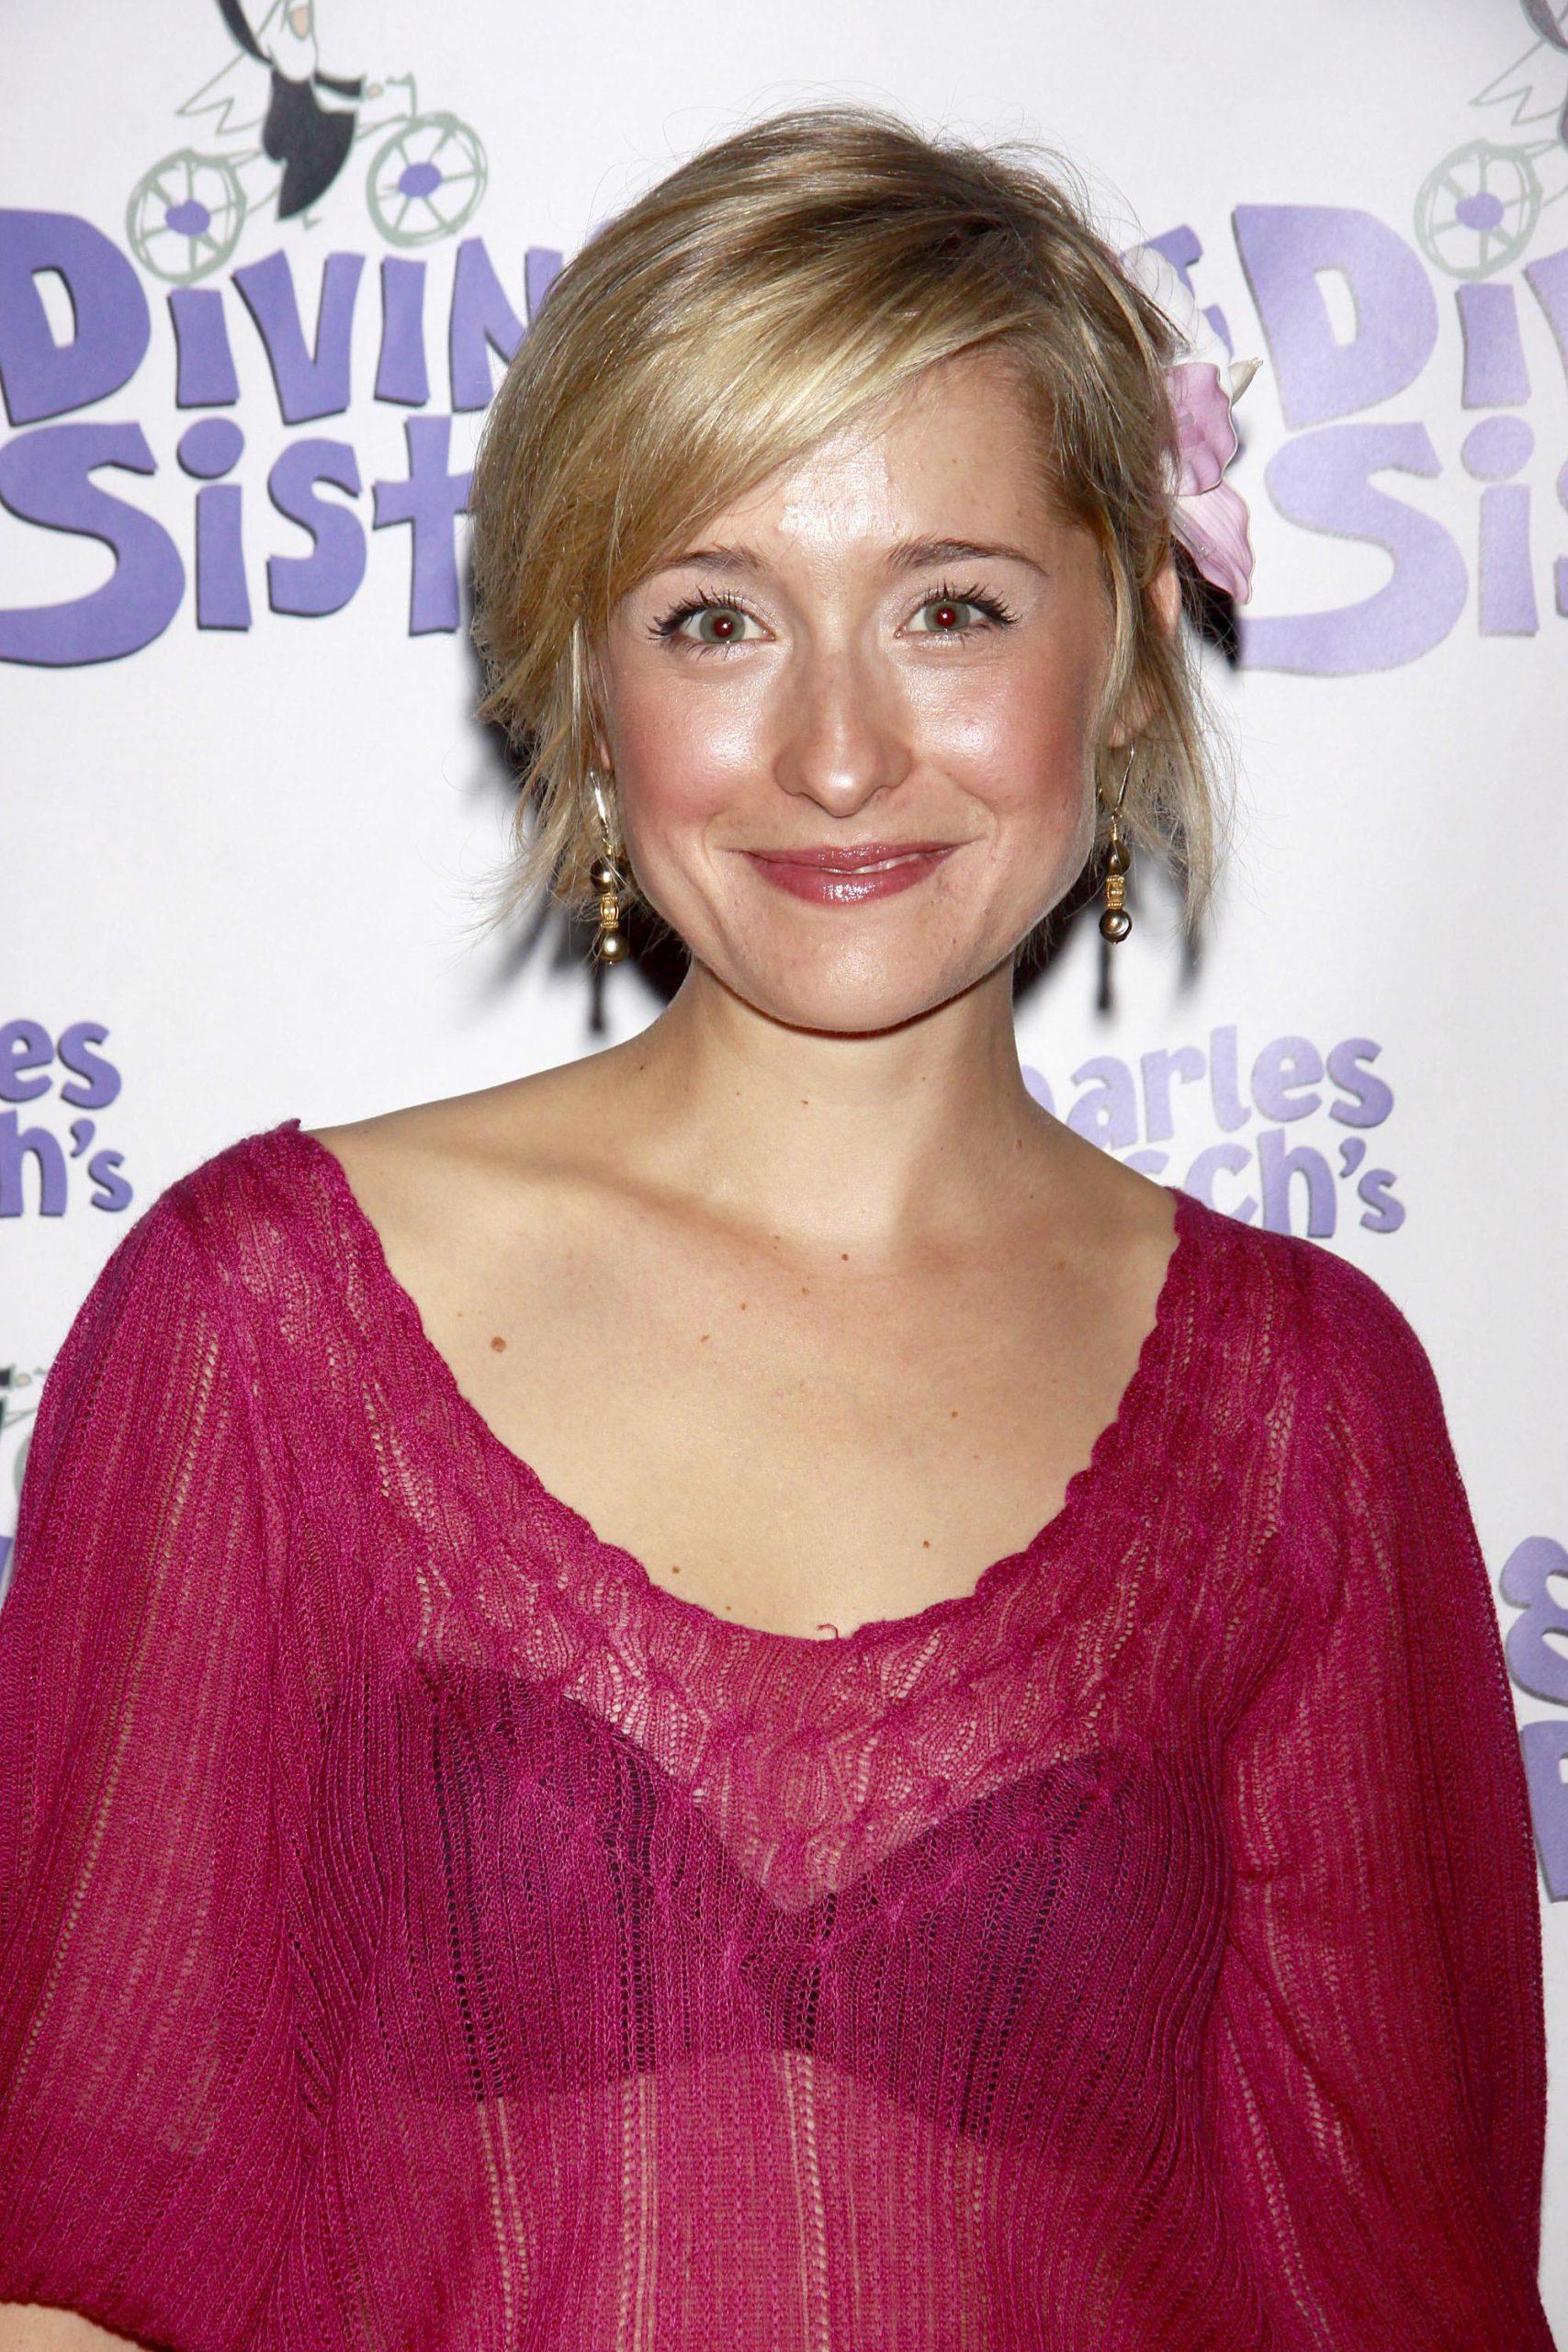 60+ Hot Pictures Of Allison Mack – Extremely Cute Smallville Tv Series Actress | Best Of Comic Books